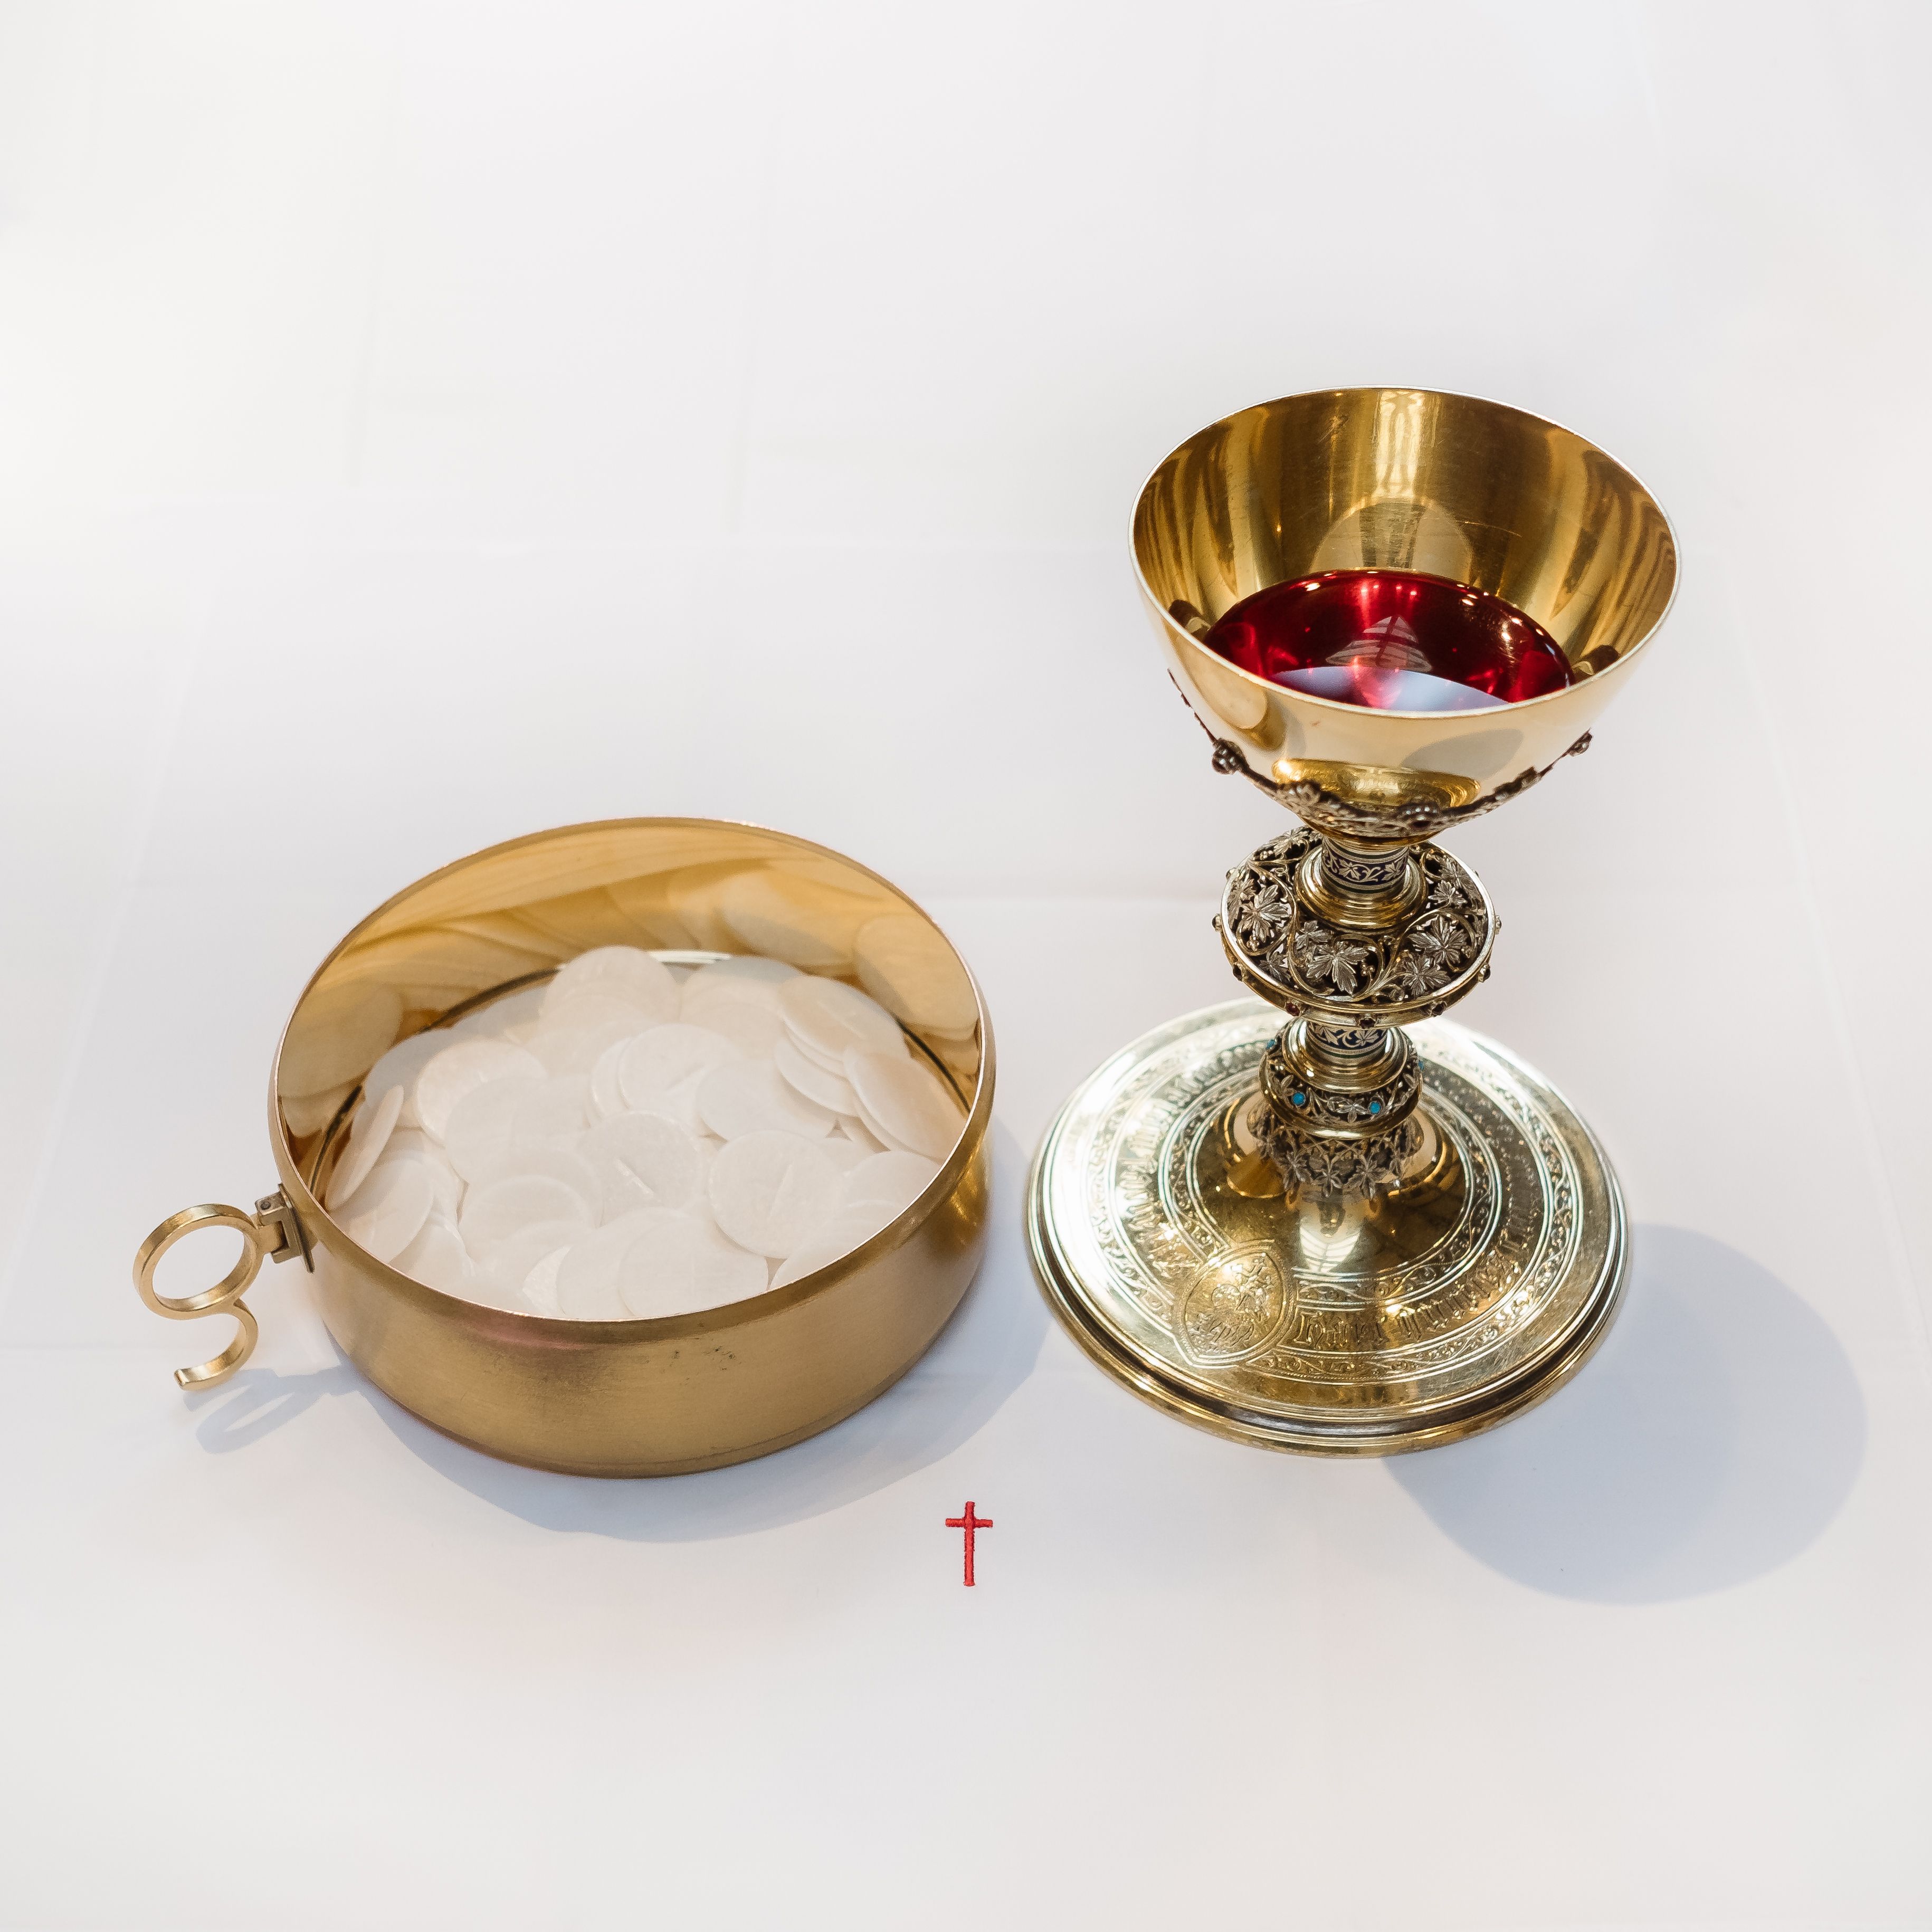 Eucharist Picture. Download Free Image